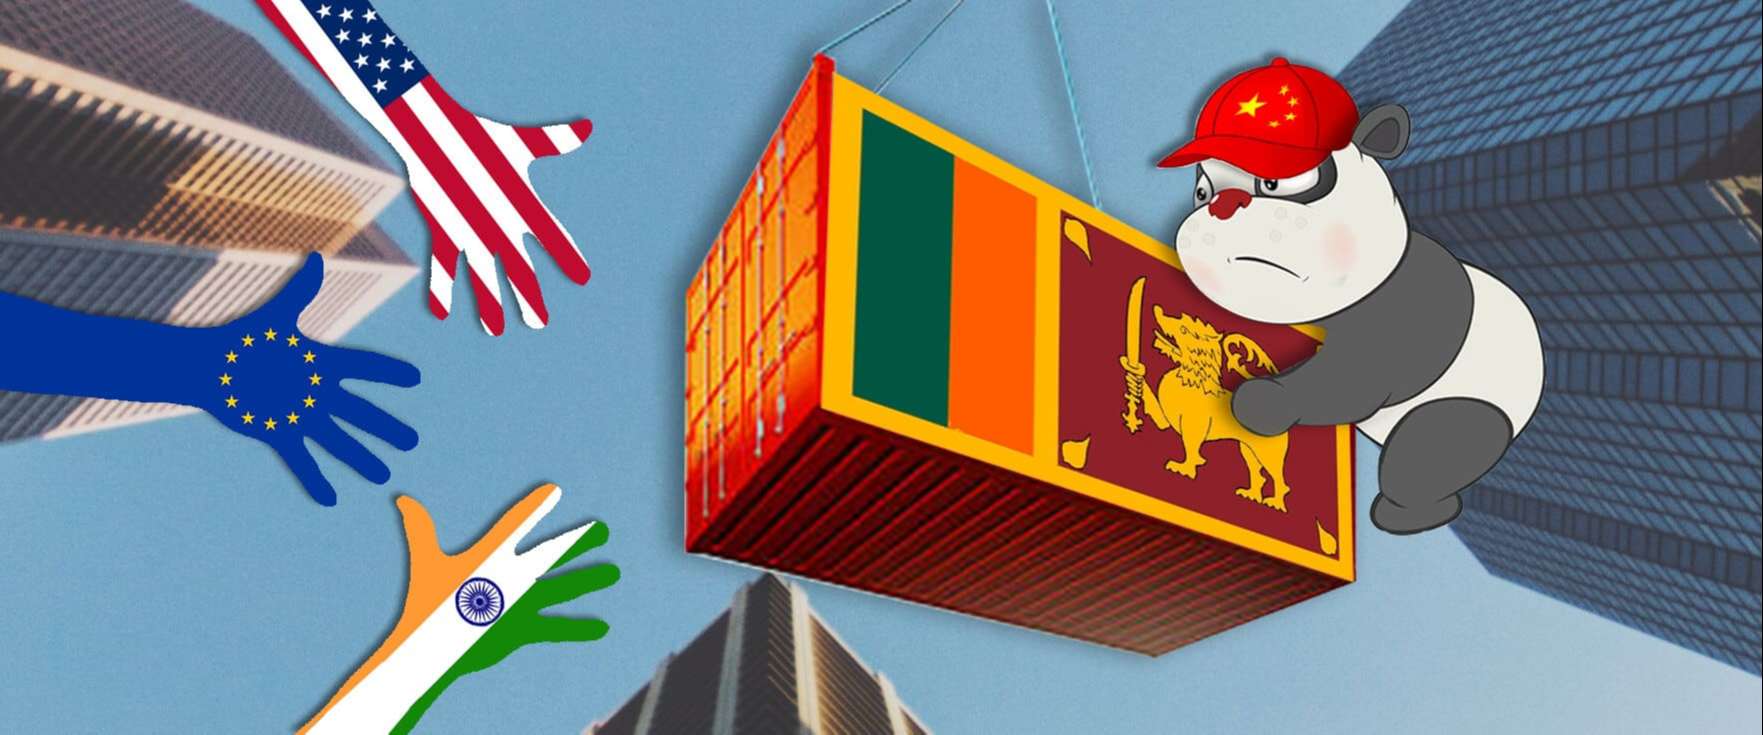 The Hambantota Port Project: A Debt Trap or a Way Out?